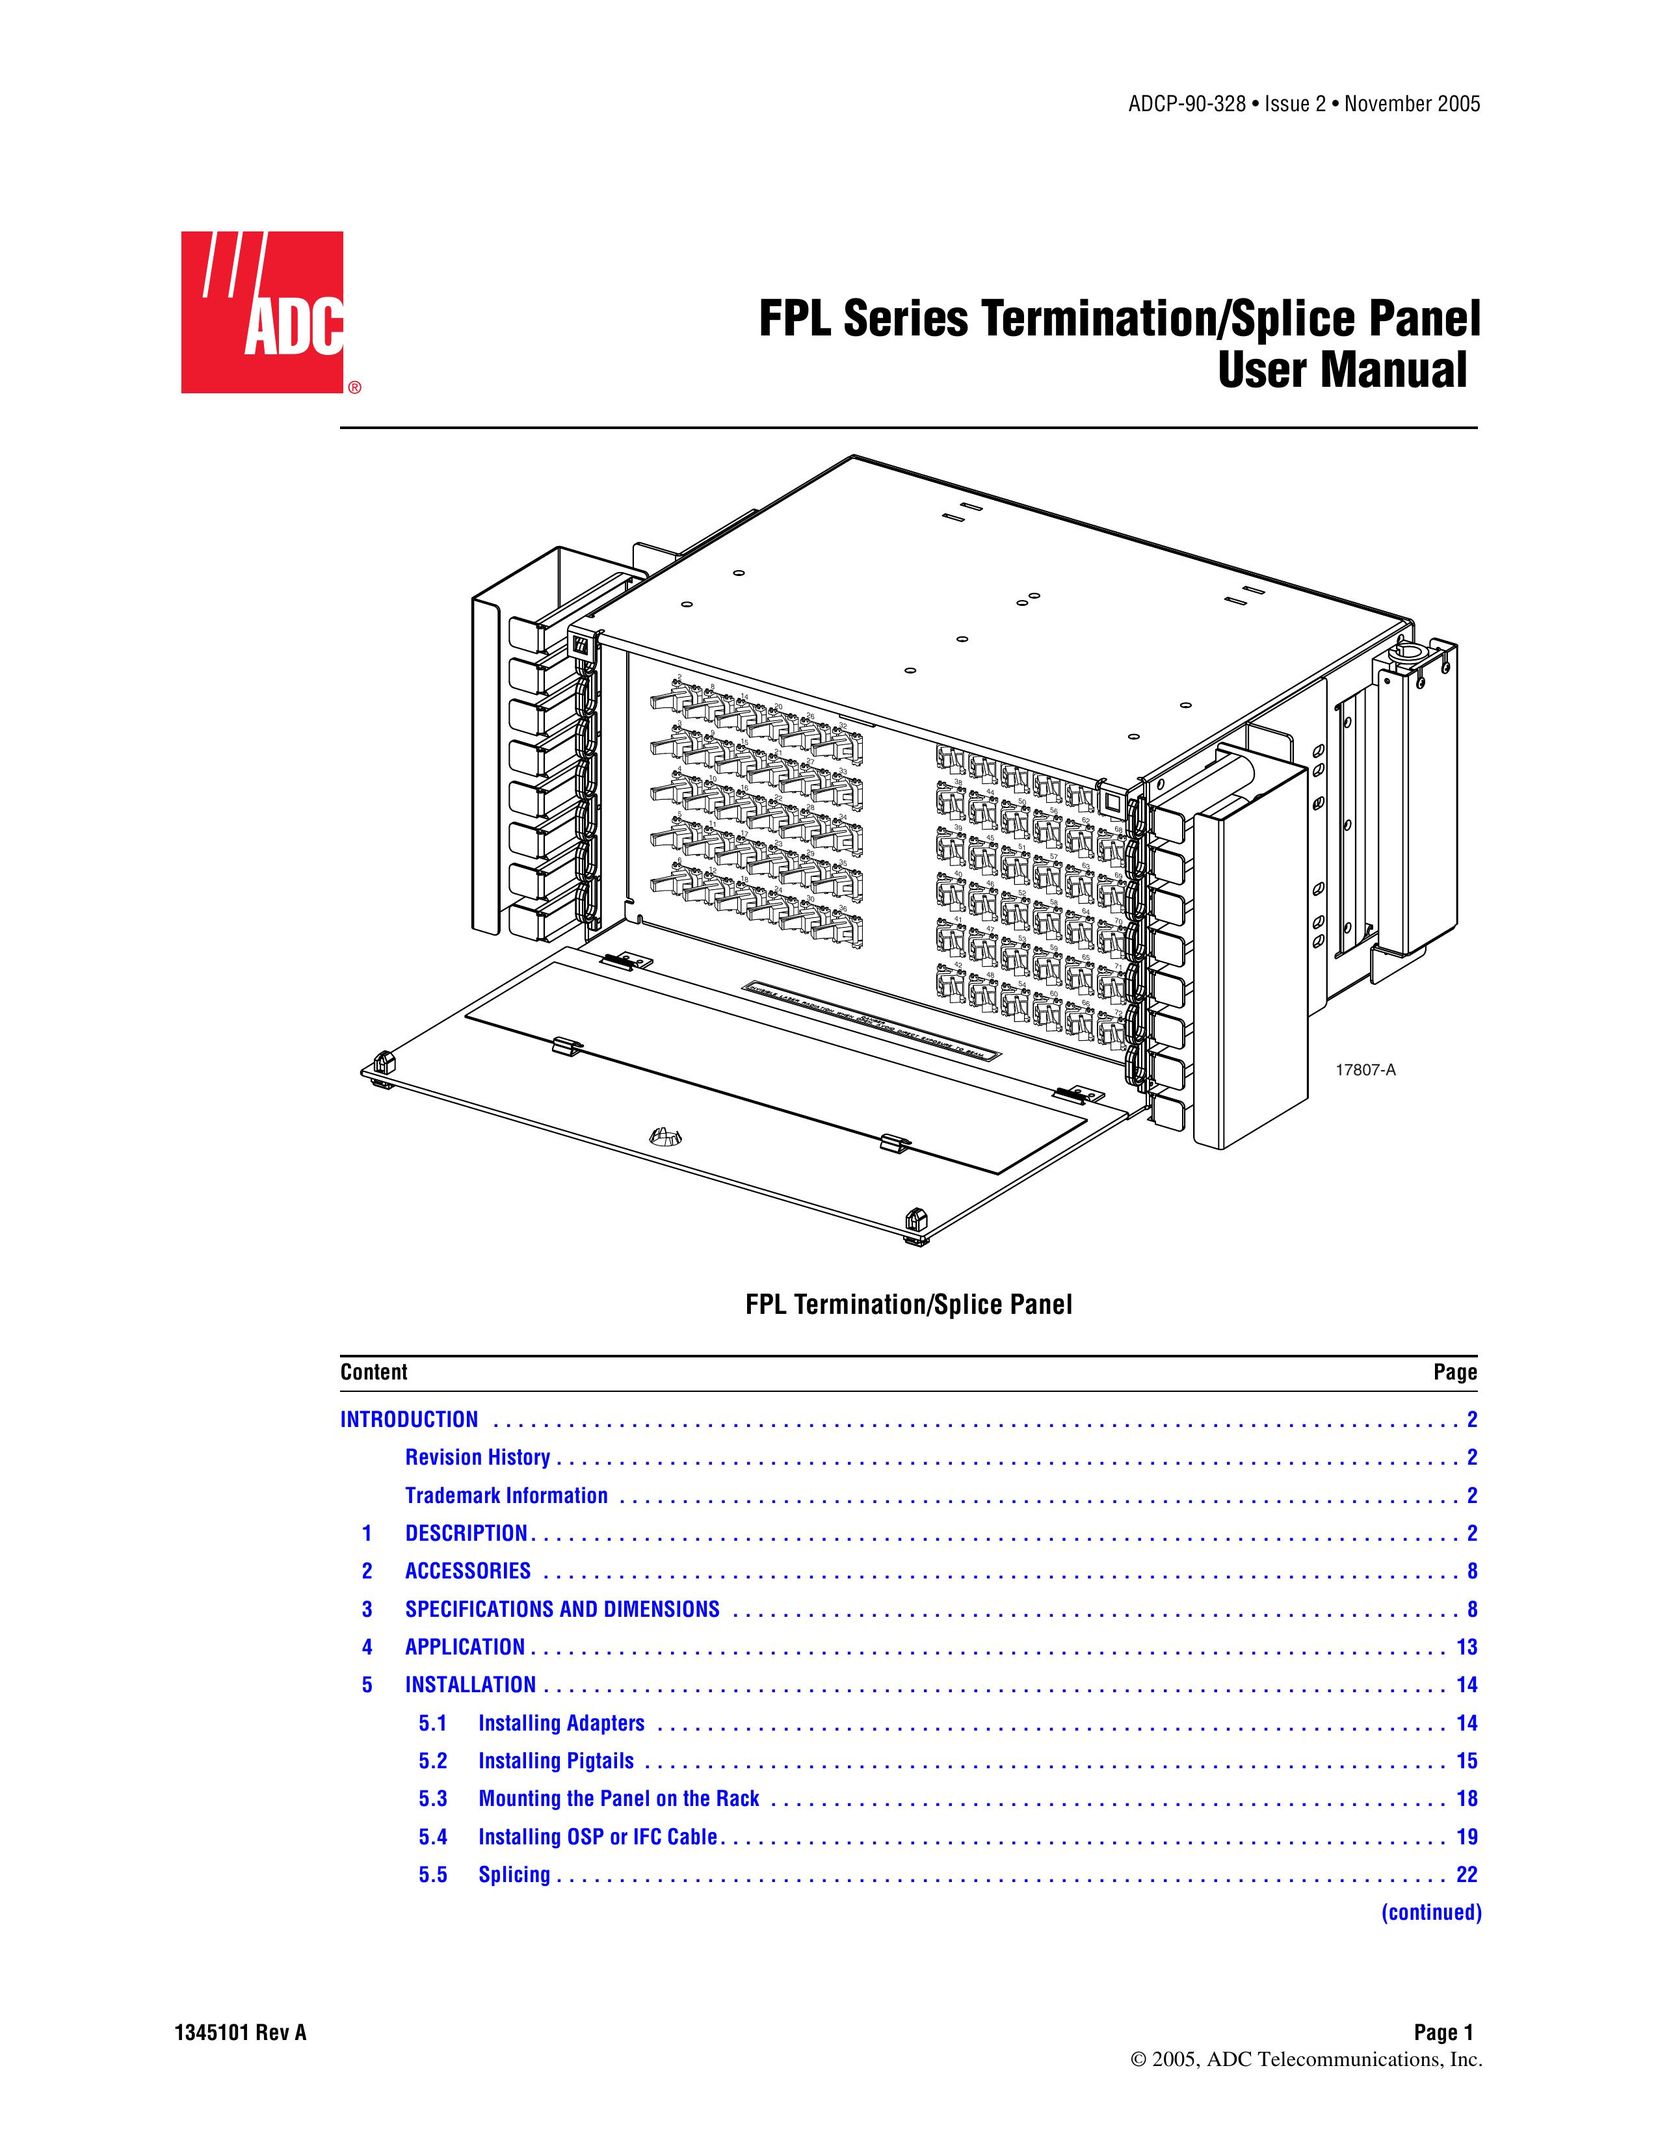 ADC FPL Series Telephone User Manual